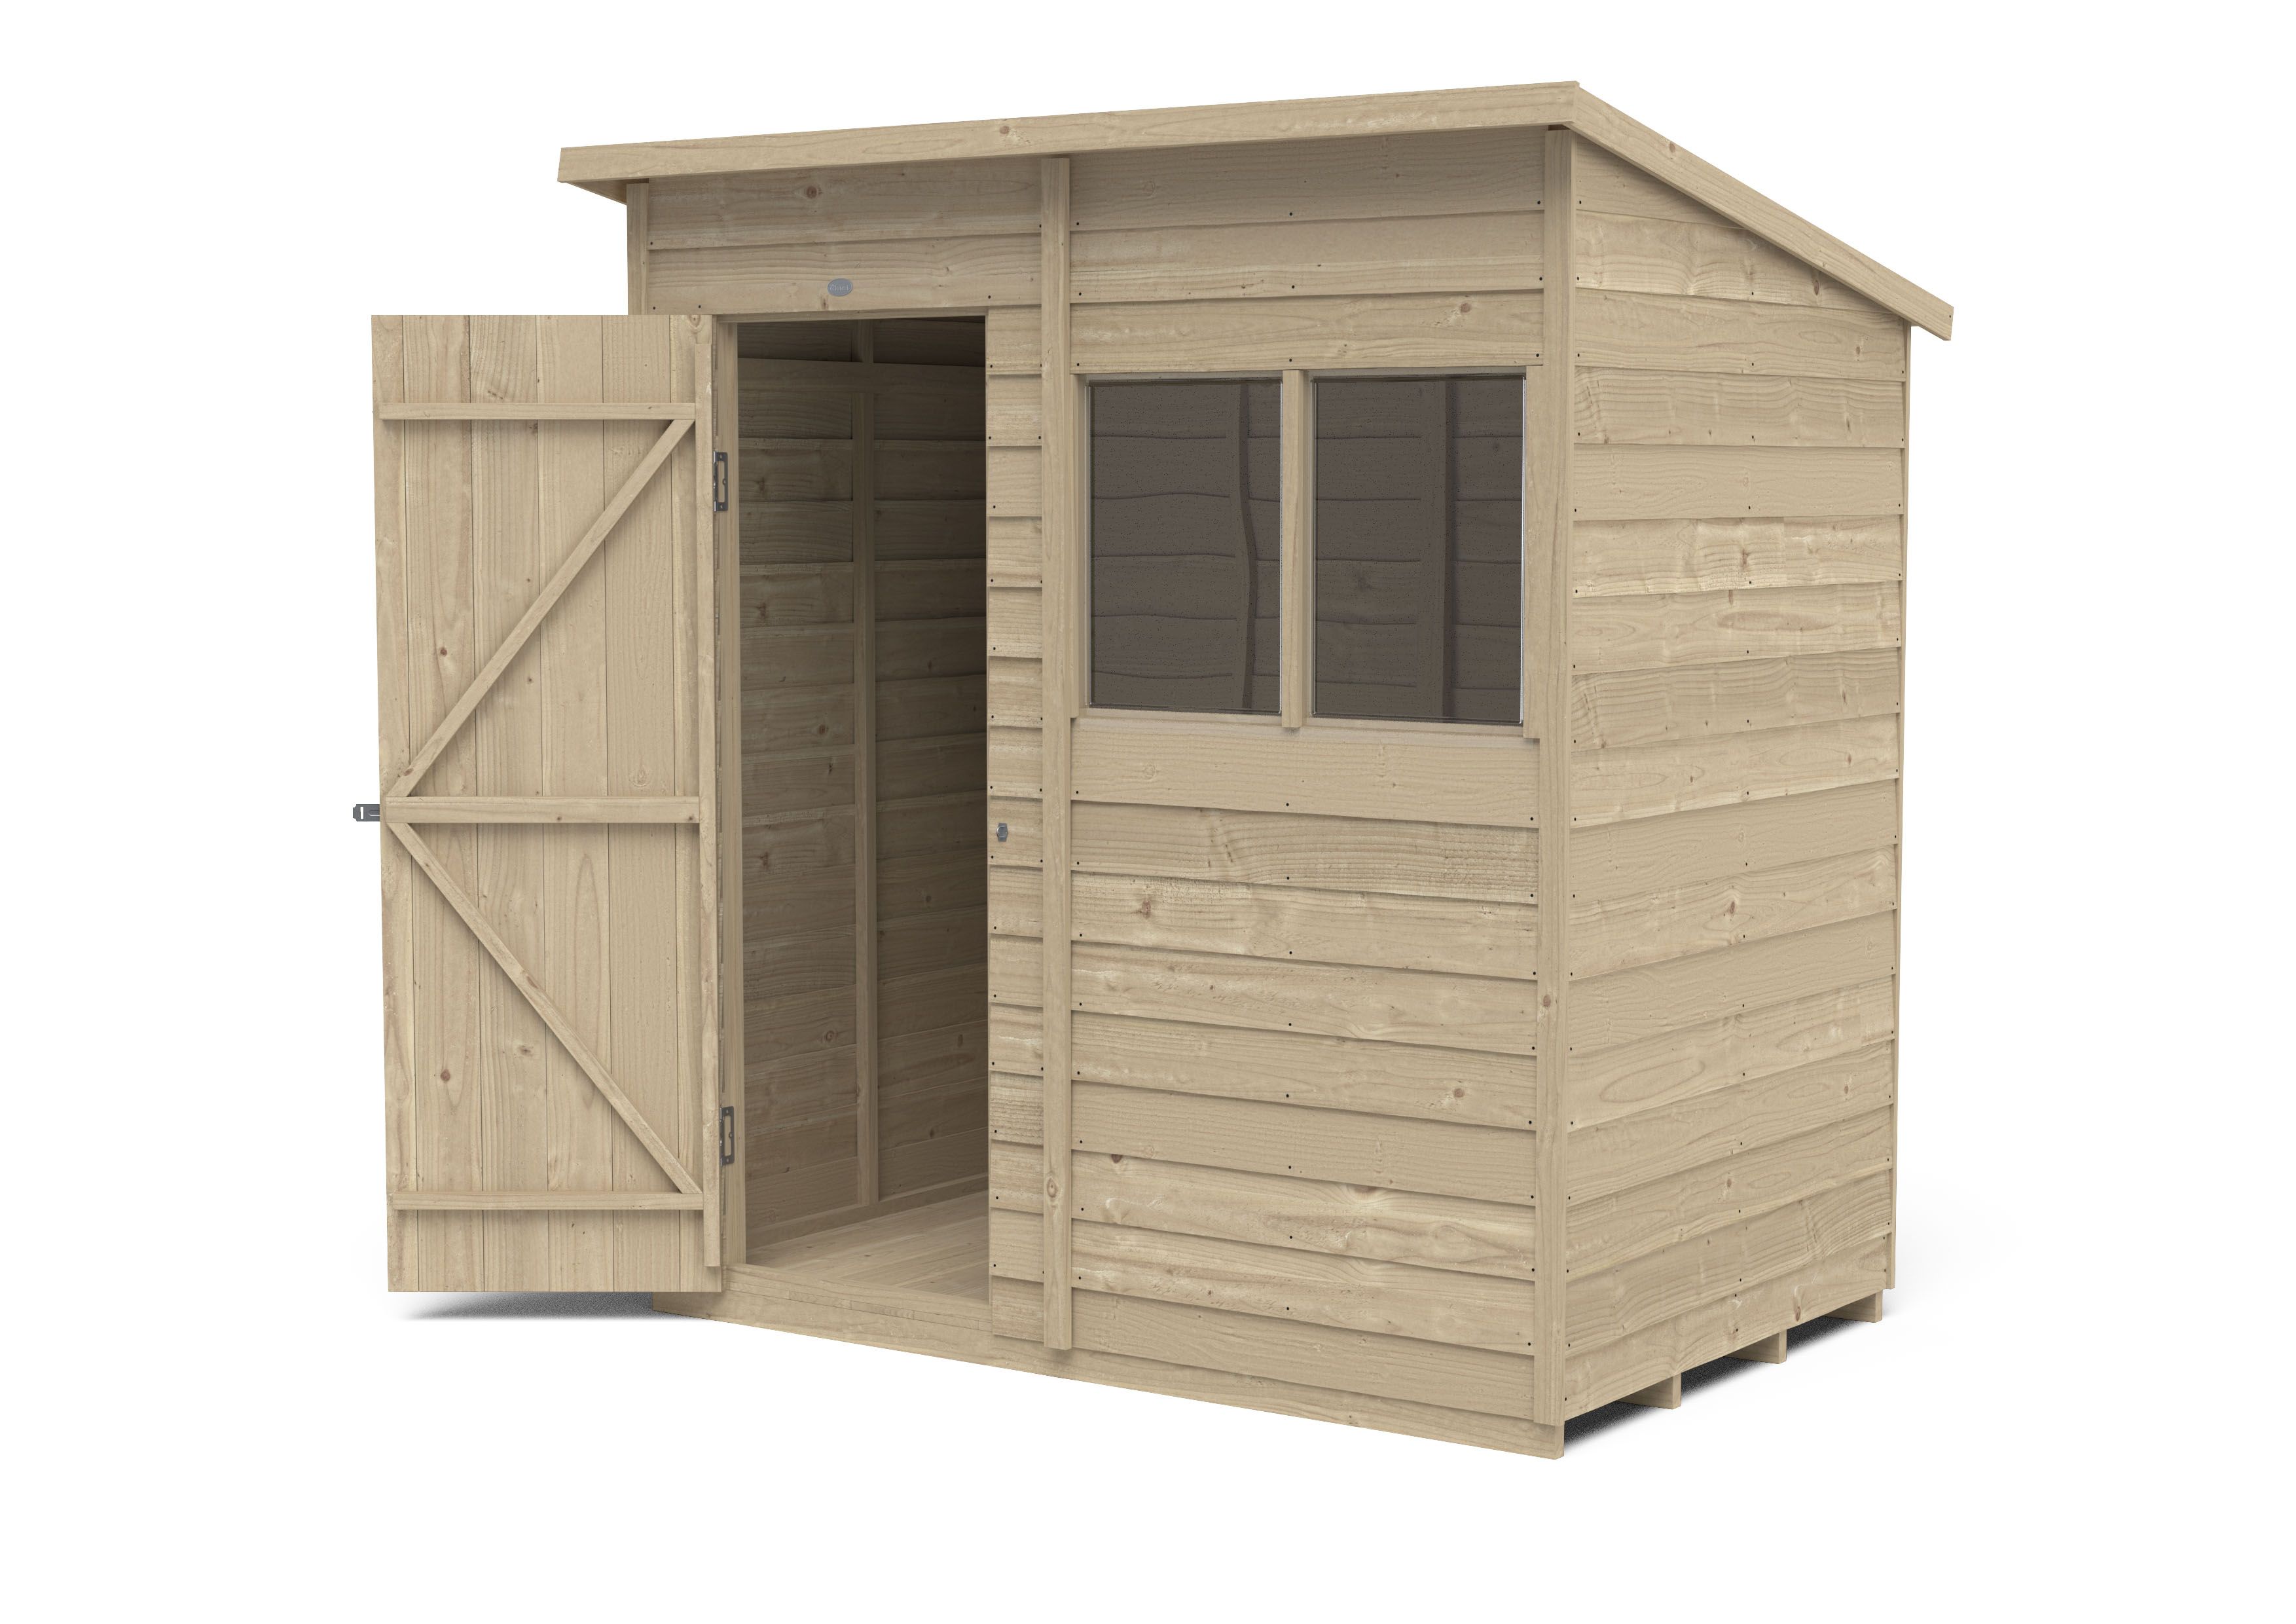 Forest Garden Overlap 6x4 ft Pent Wooden Pressure treated Shed with floor & 2 windows (Base included)